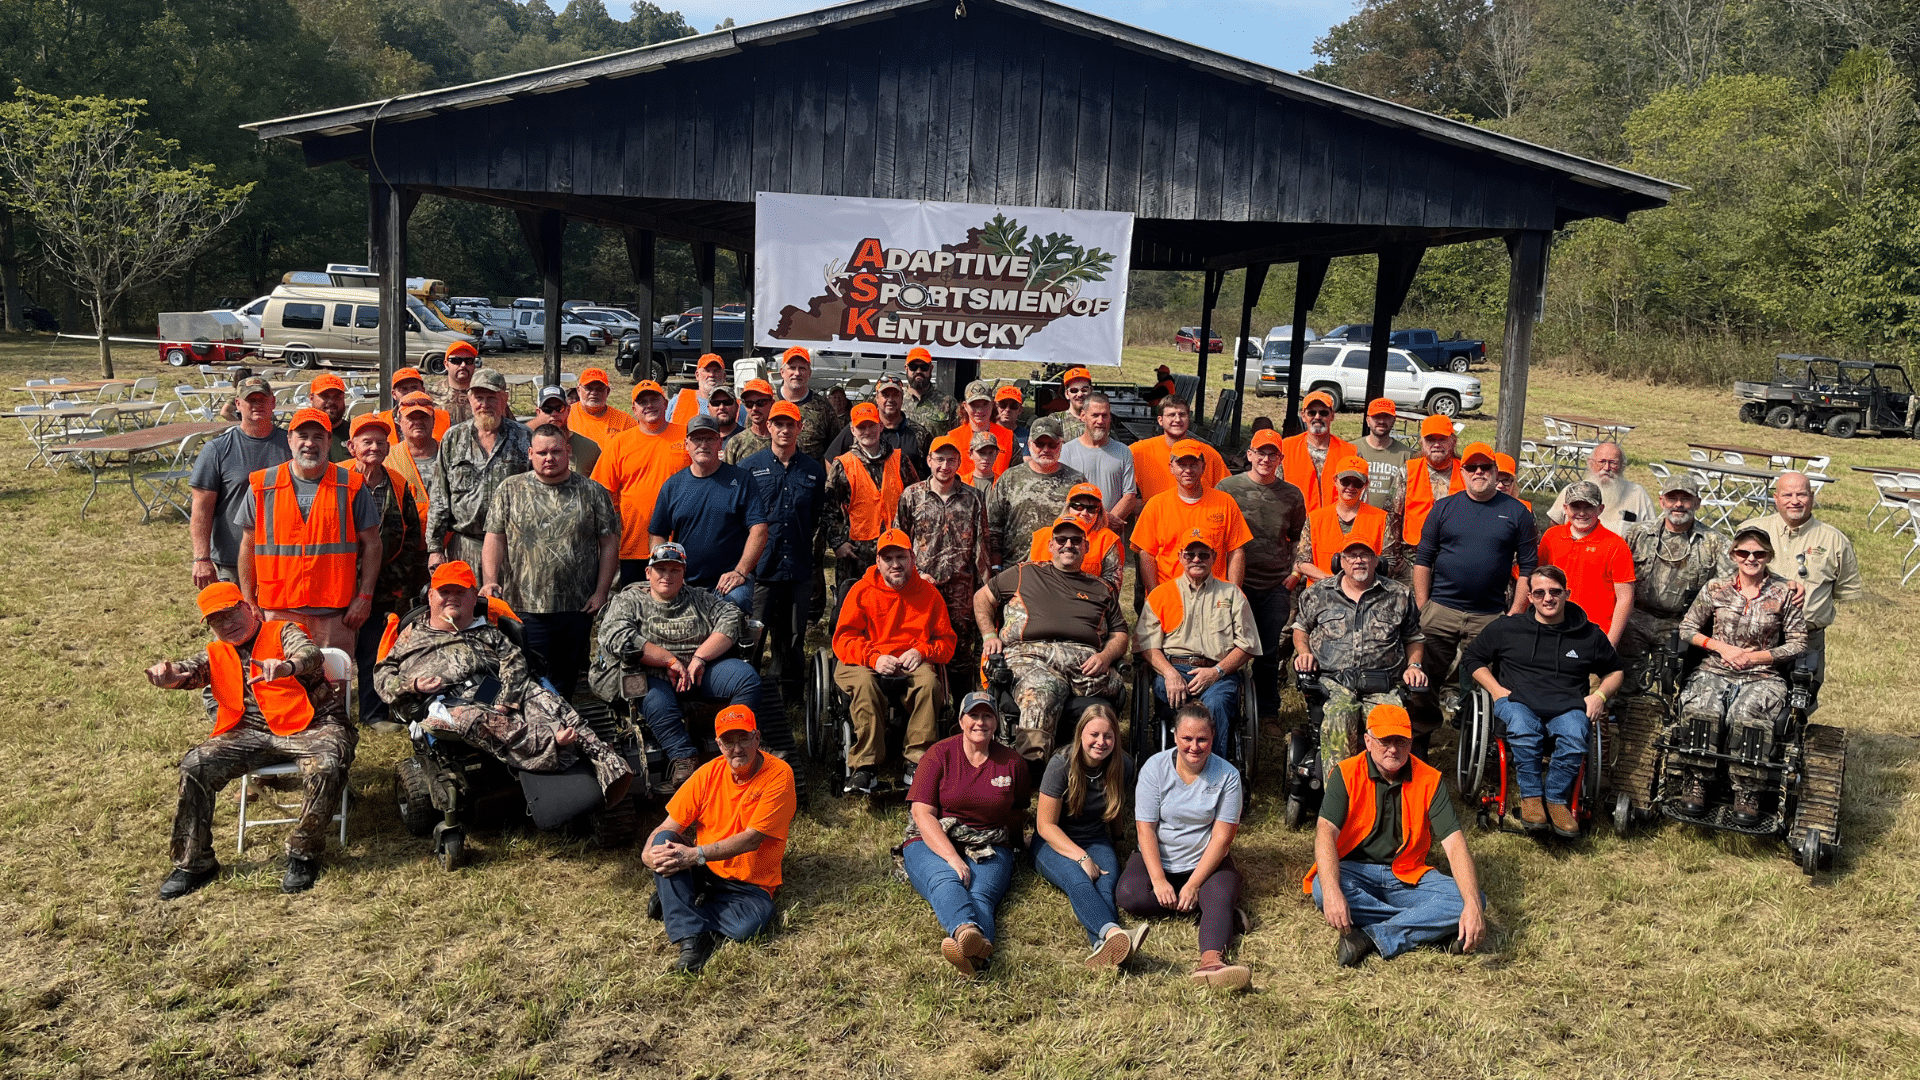 Group photo during hunt